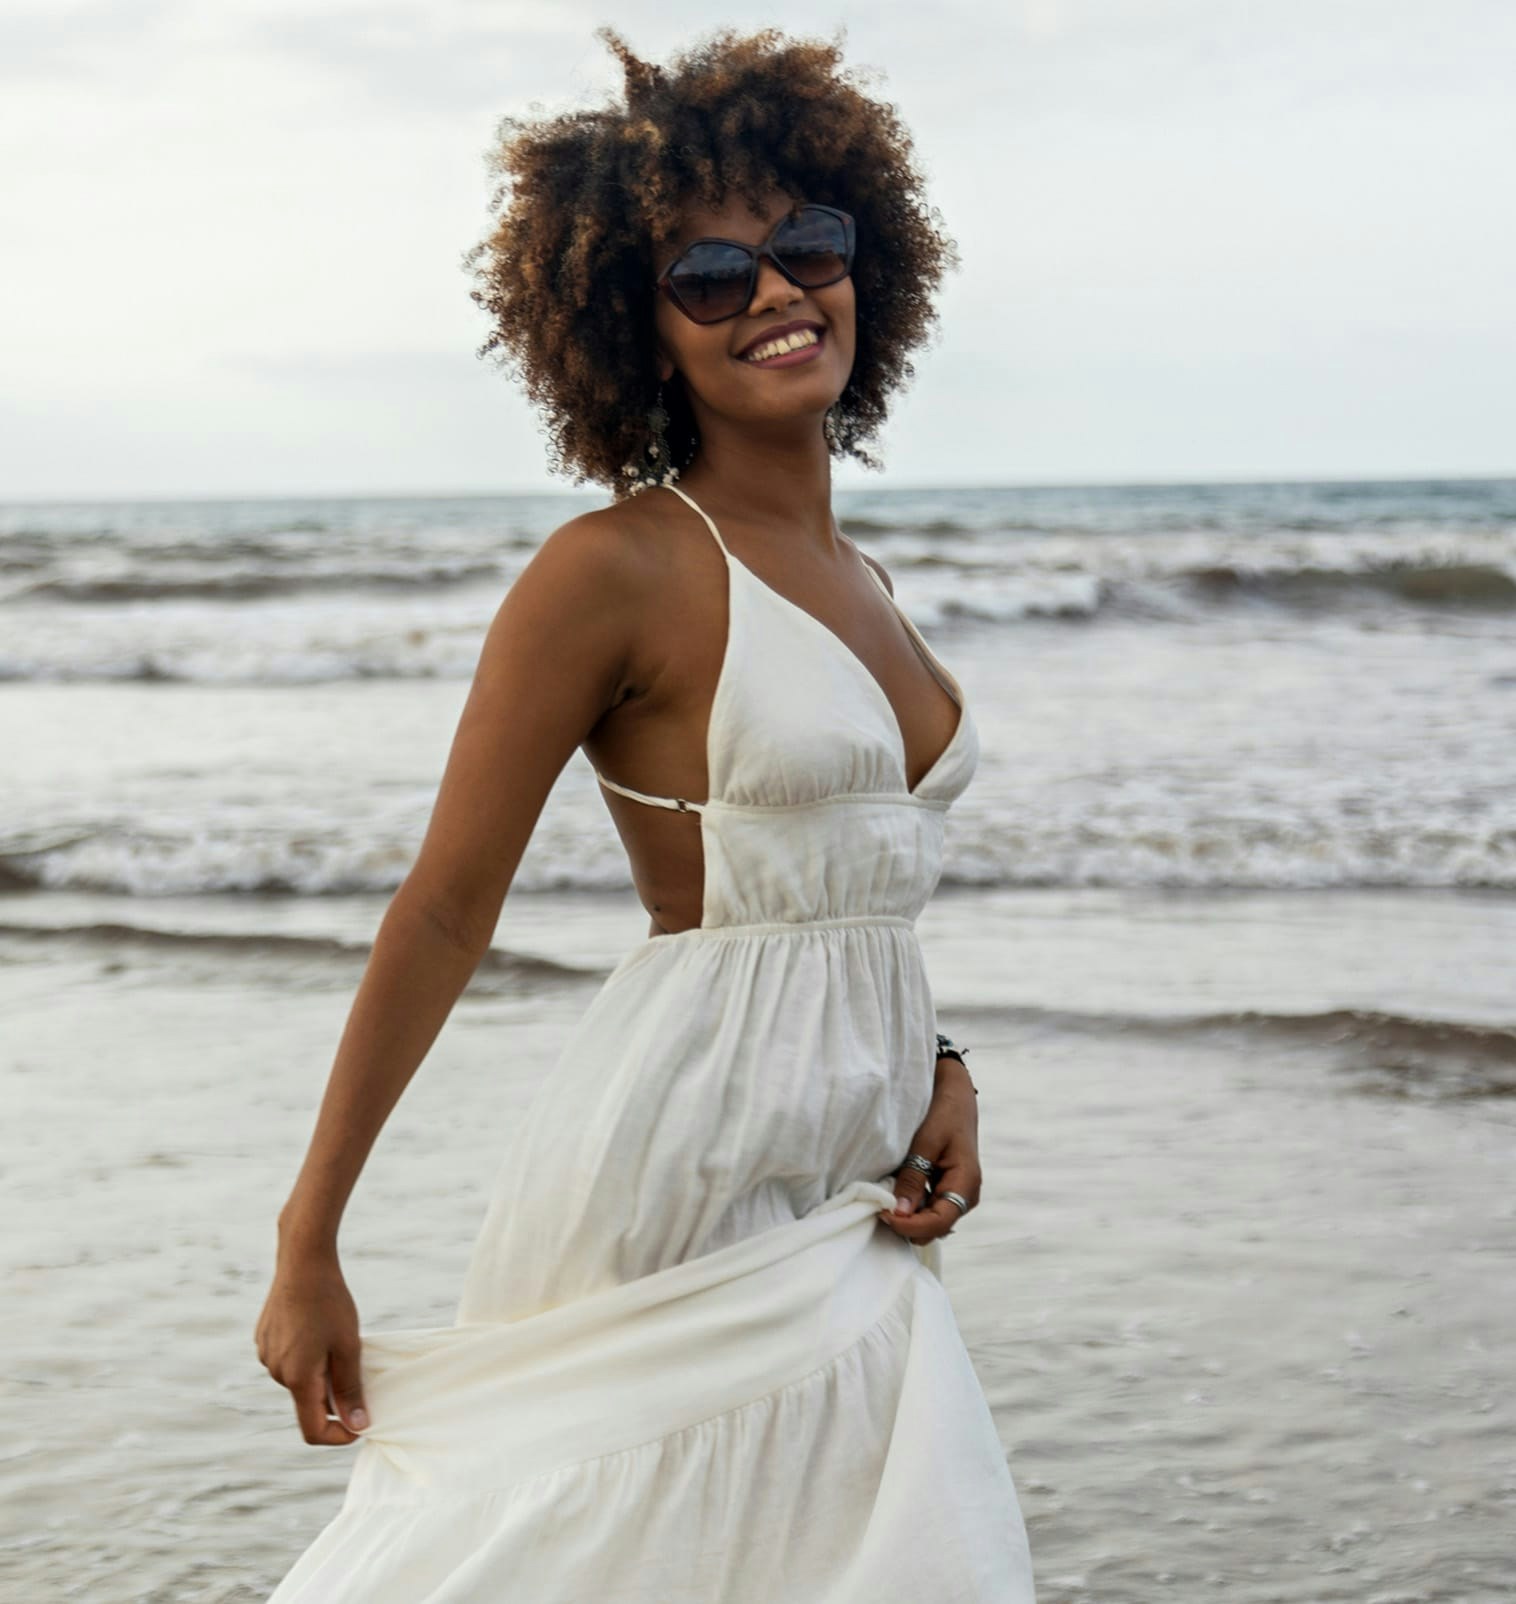 smiling woman with sunglasses wearing white dress on beach